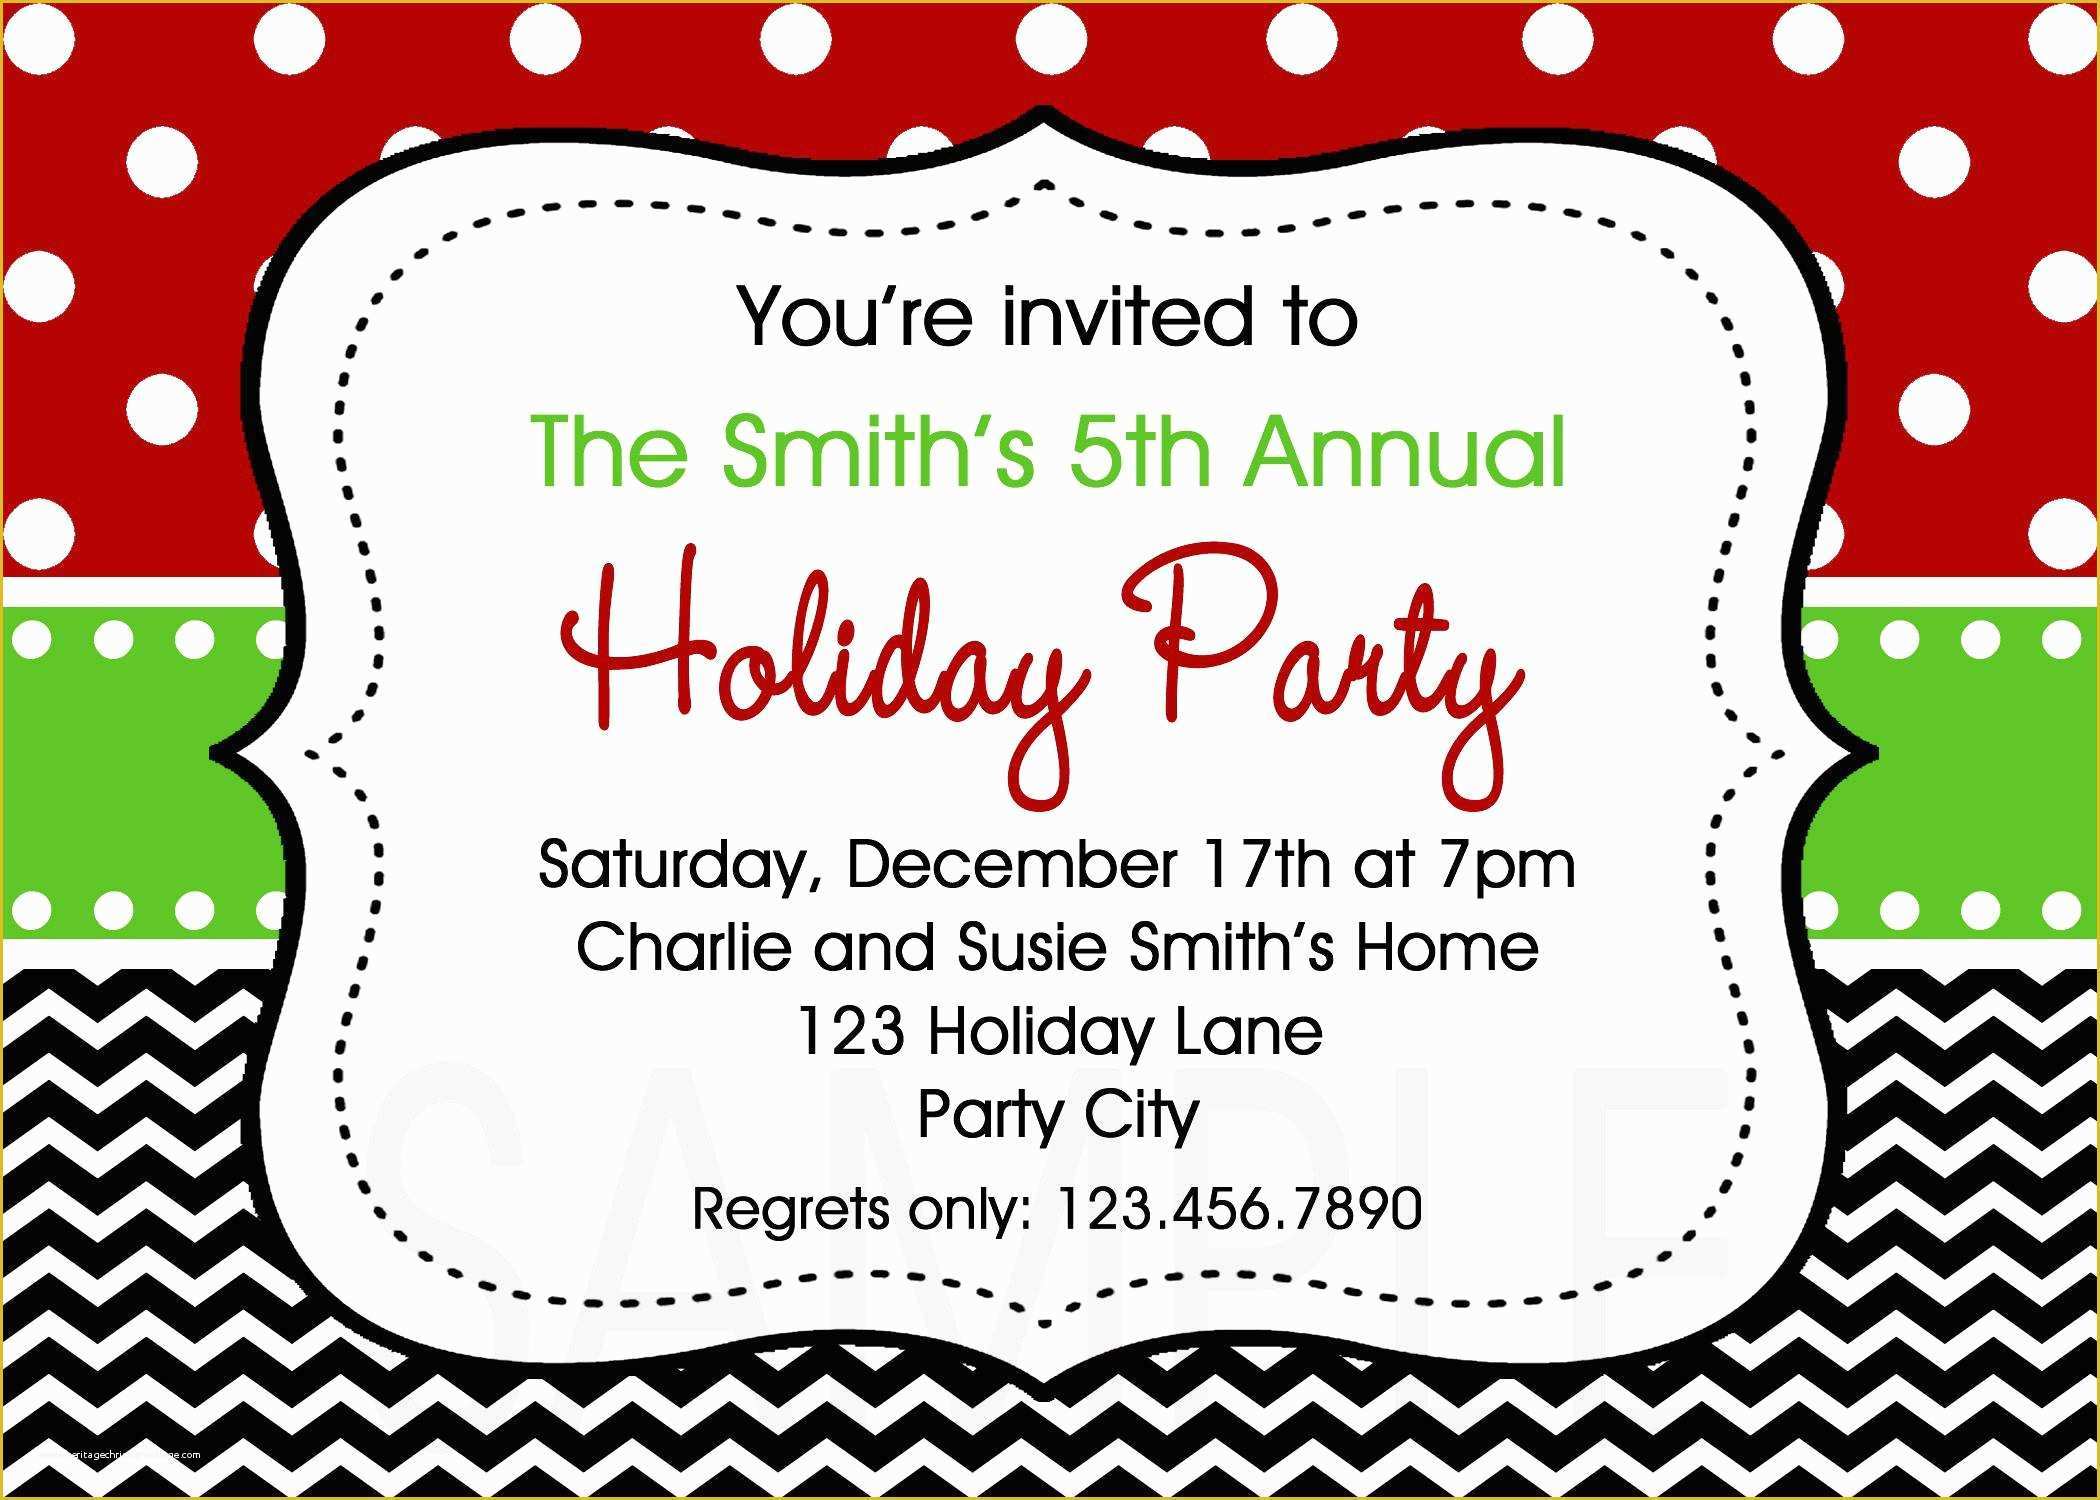 Christmas Email Invitations Templates Free Of Holiday Party Invites